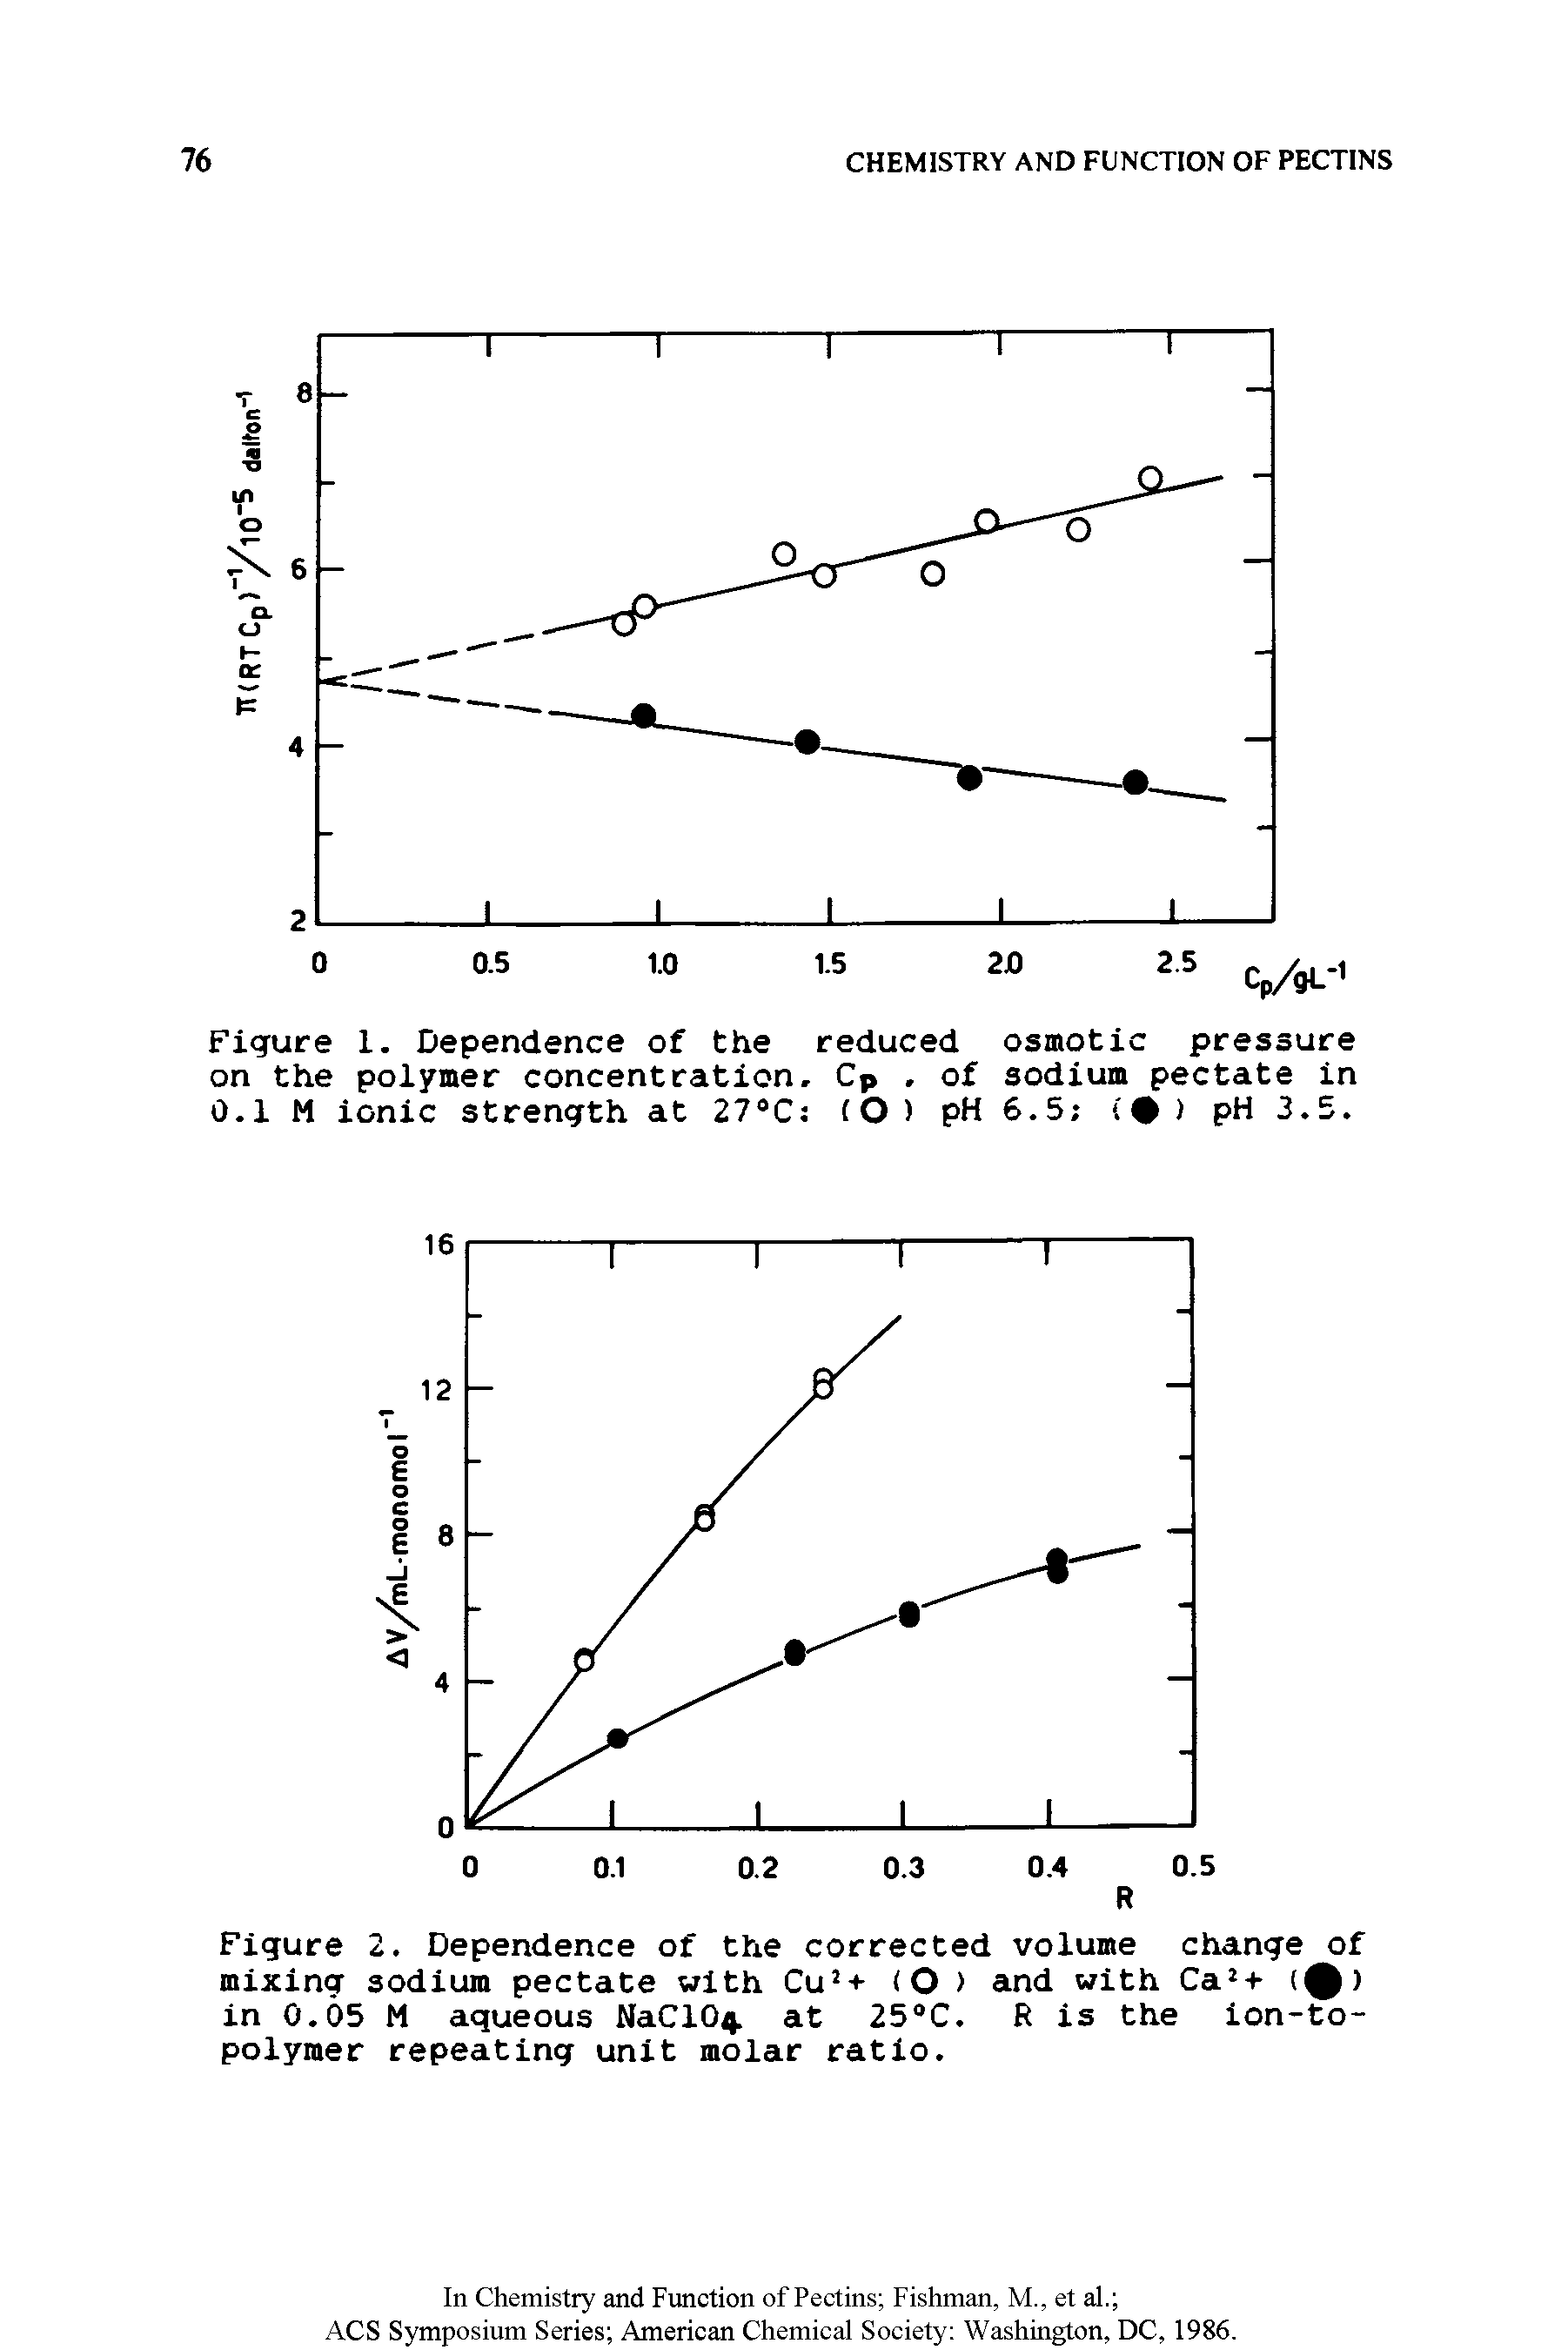 Figure 1. Dependence of the reduced osmotic pressure on the polymer concentration, Cp. of sodium pectate in 0.1 M ionic strength at 27 C (O ) pH 6.5 ( ) pH 3.5.